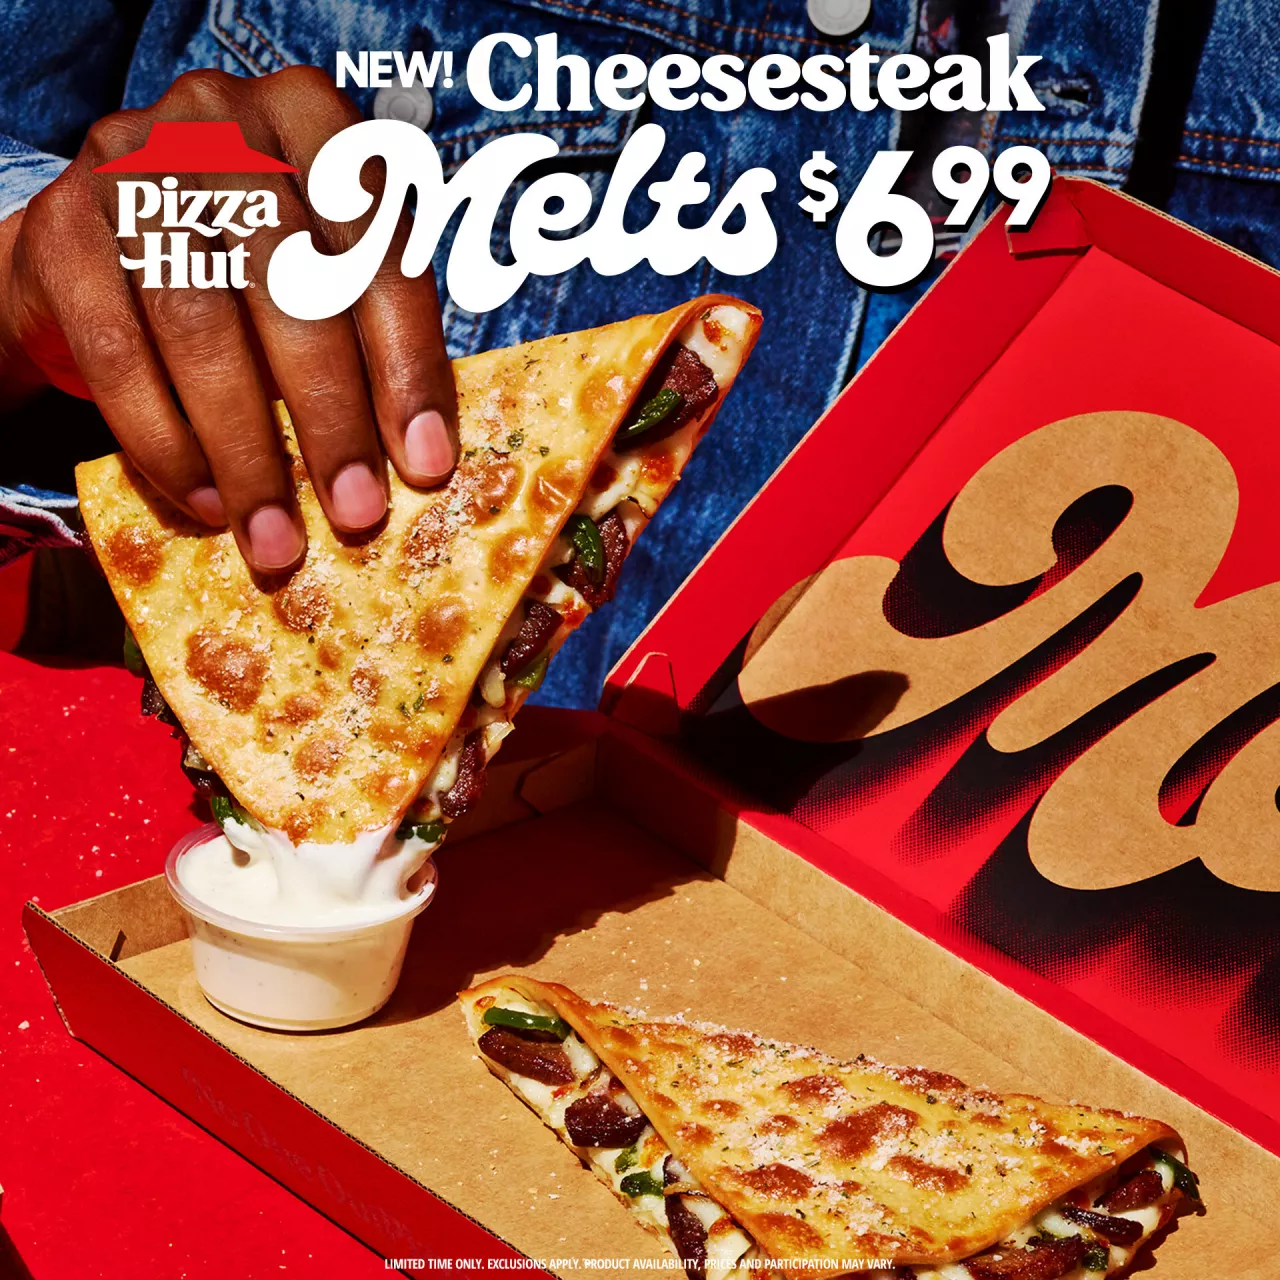 PIZZA HUT BRINGS SIRLOIN STEAK TO RESTAURANTS NATIONALLY FOR THE FIRST TIME WITH TWO NEW MENU ITEMS: CHEESESTEAK PIZZA AND CHEESESTEAK MELTS; LAUNCHES PIZZA HAUTE’S DINNER SERIES WITH CHAIN img#2